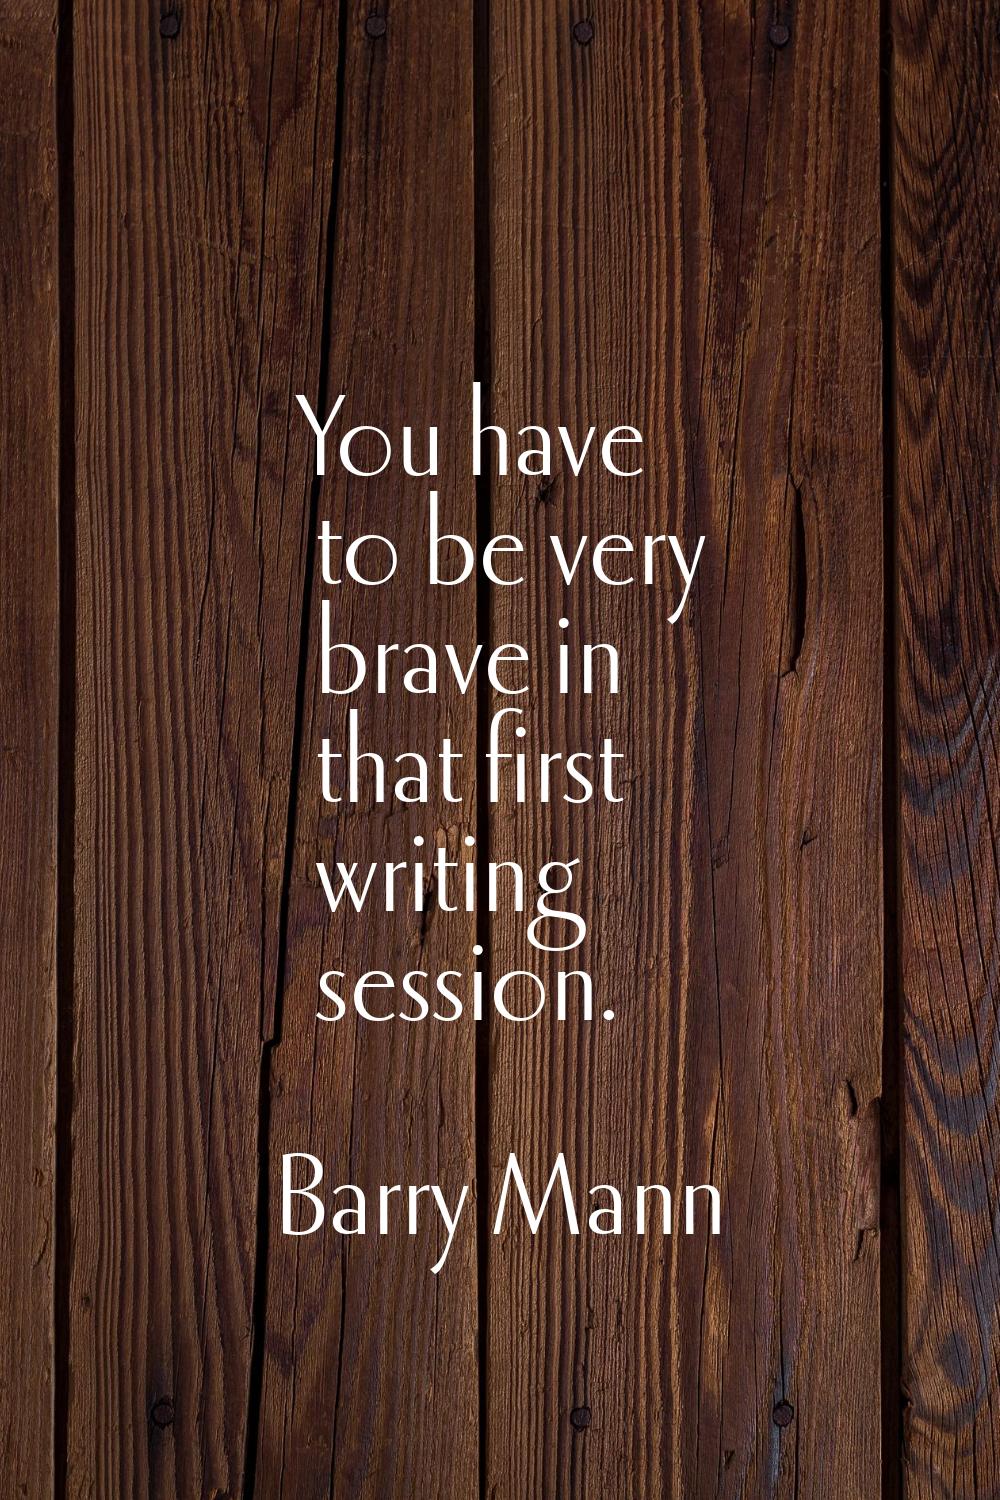 You have to be very brave in that first writing session.